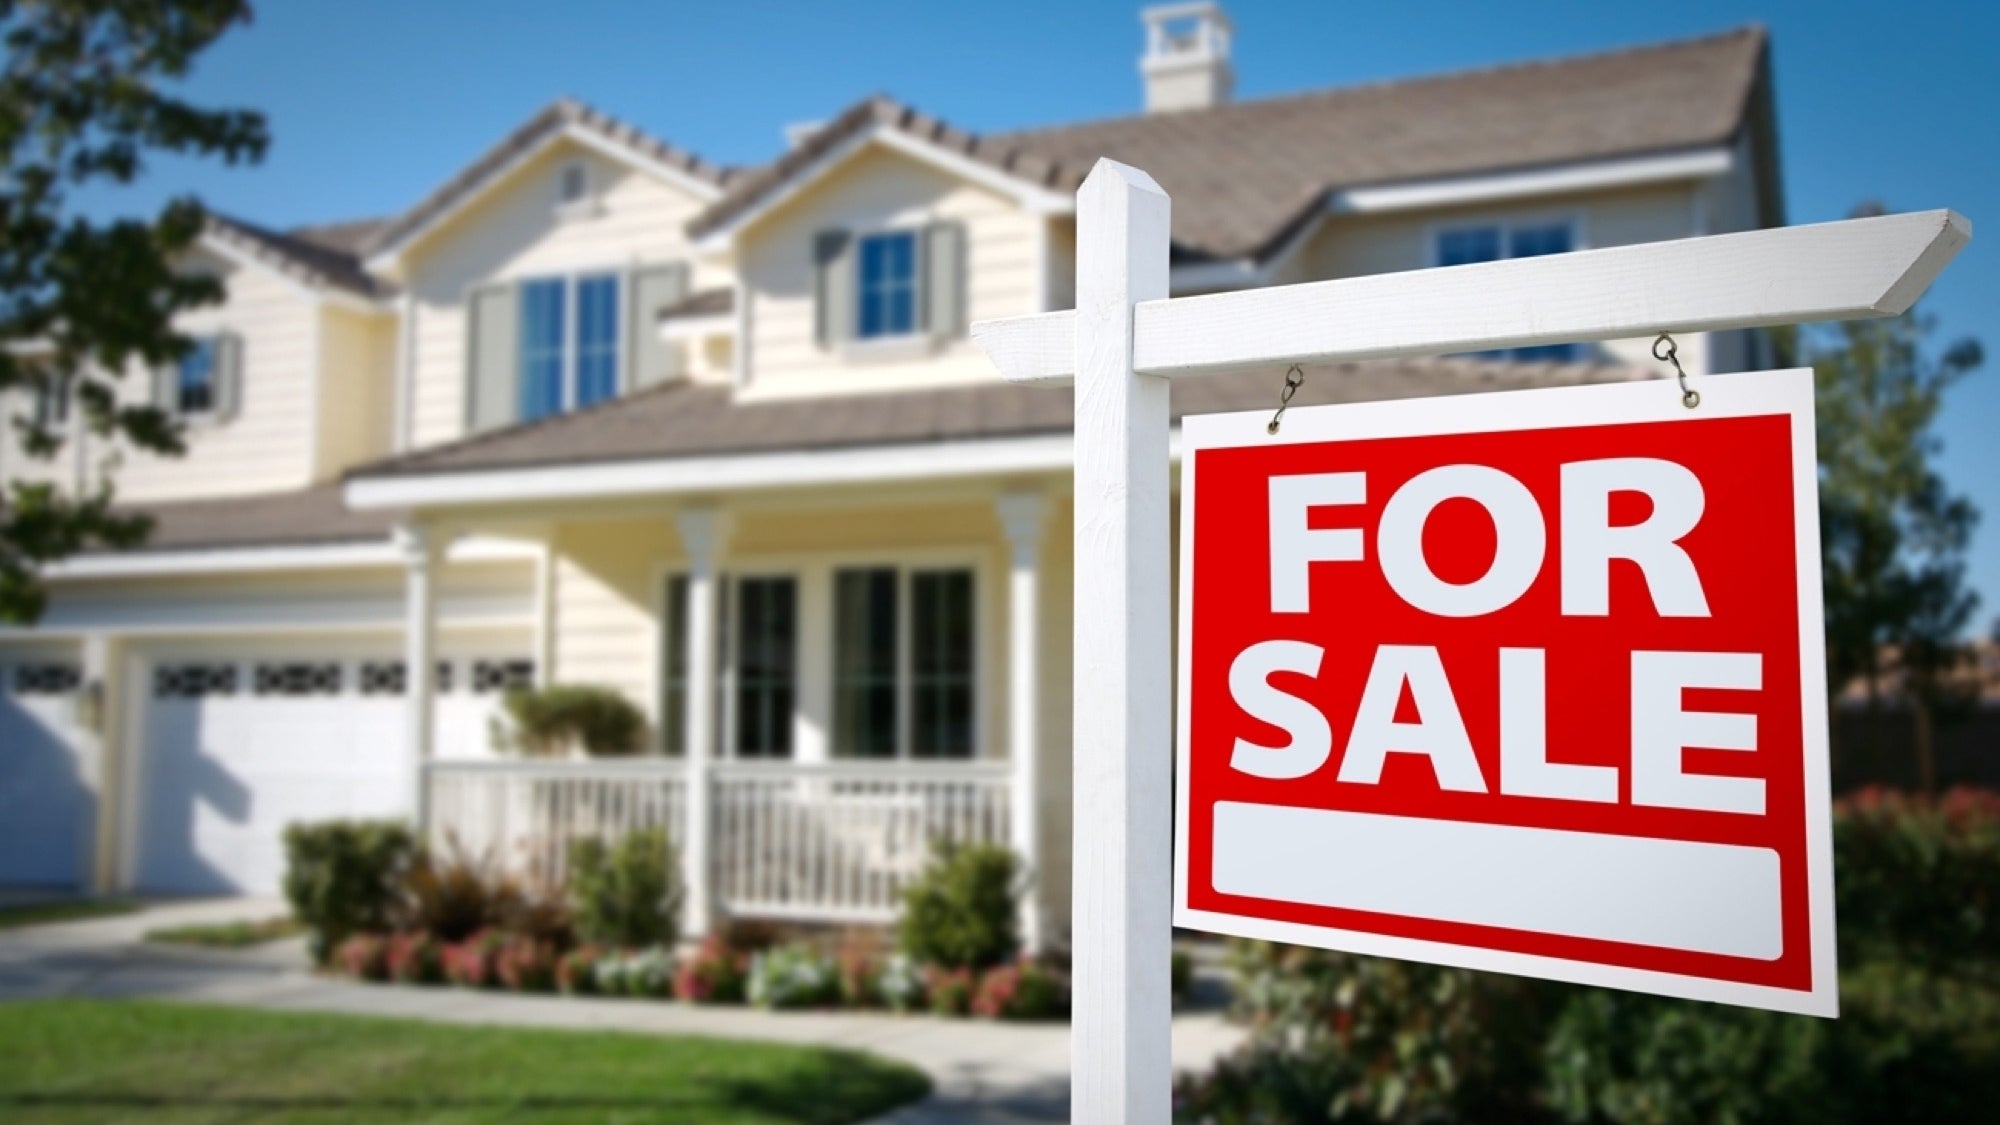 The impactful process of selling the house